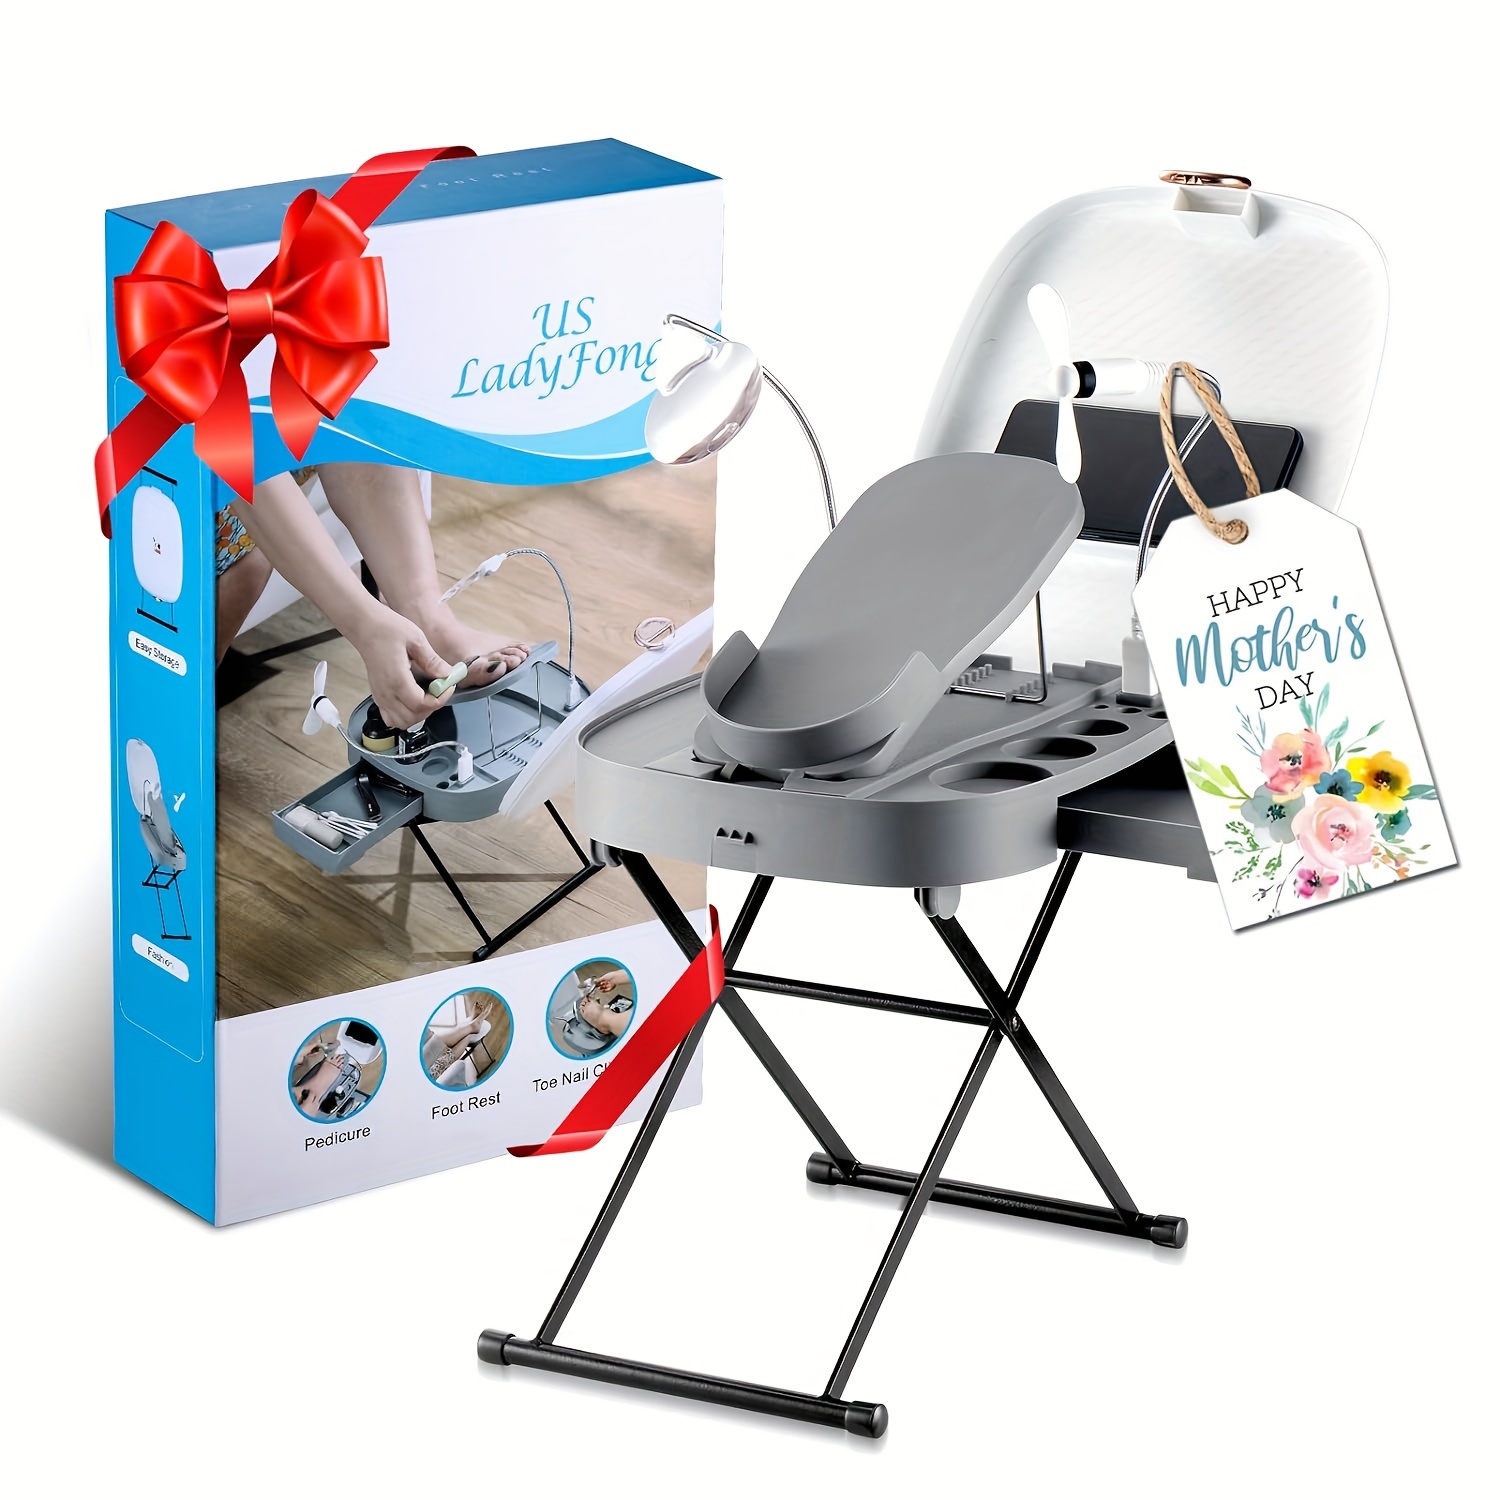 

Pedicure Stool The Pedicure Tools For Easy At-home Pedicures Adjustable Pedicure Foot Rest, For Mom From Daughter, Son - Birthday Gifts For Women